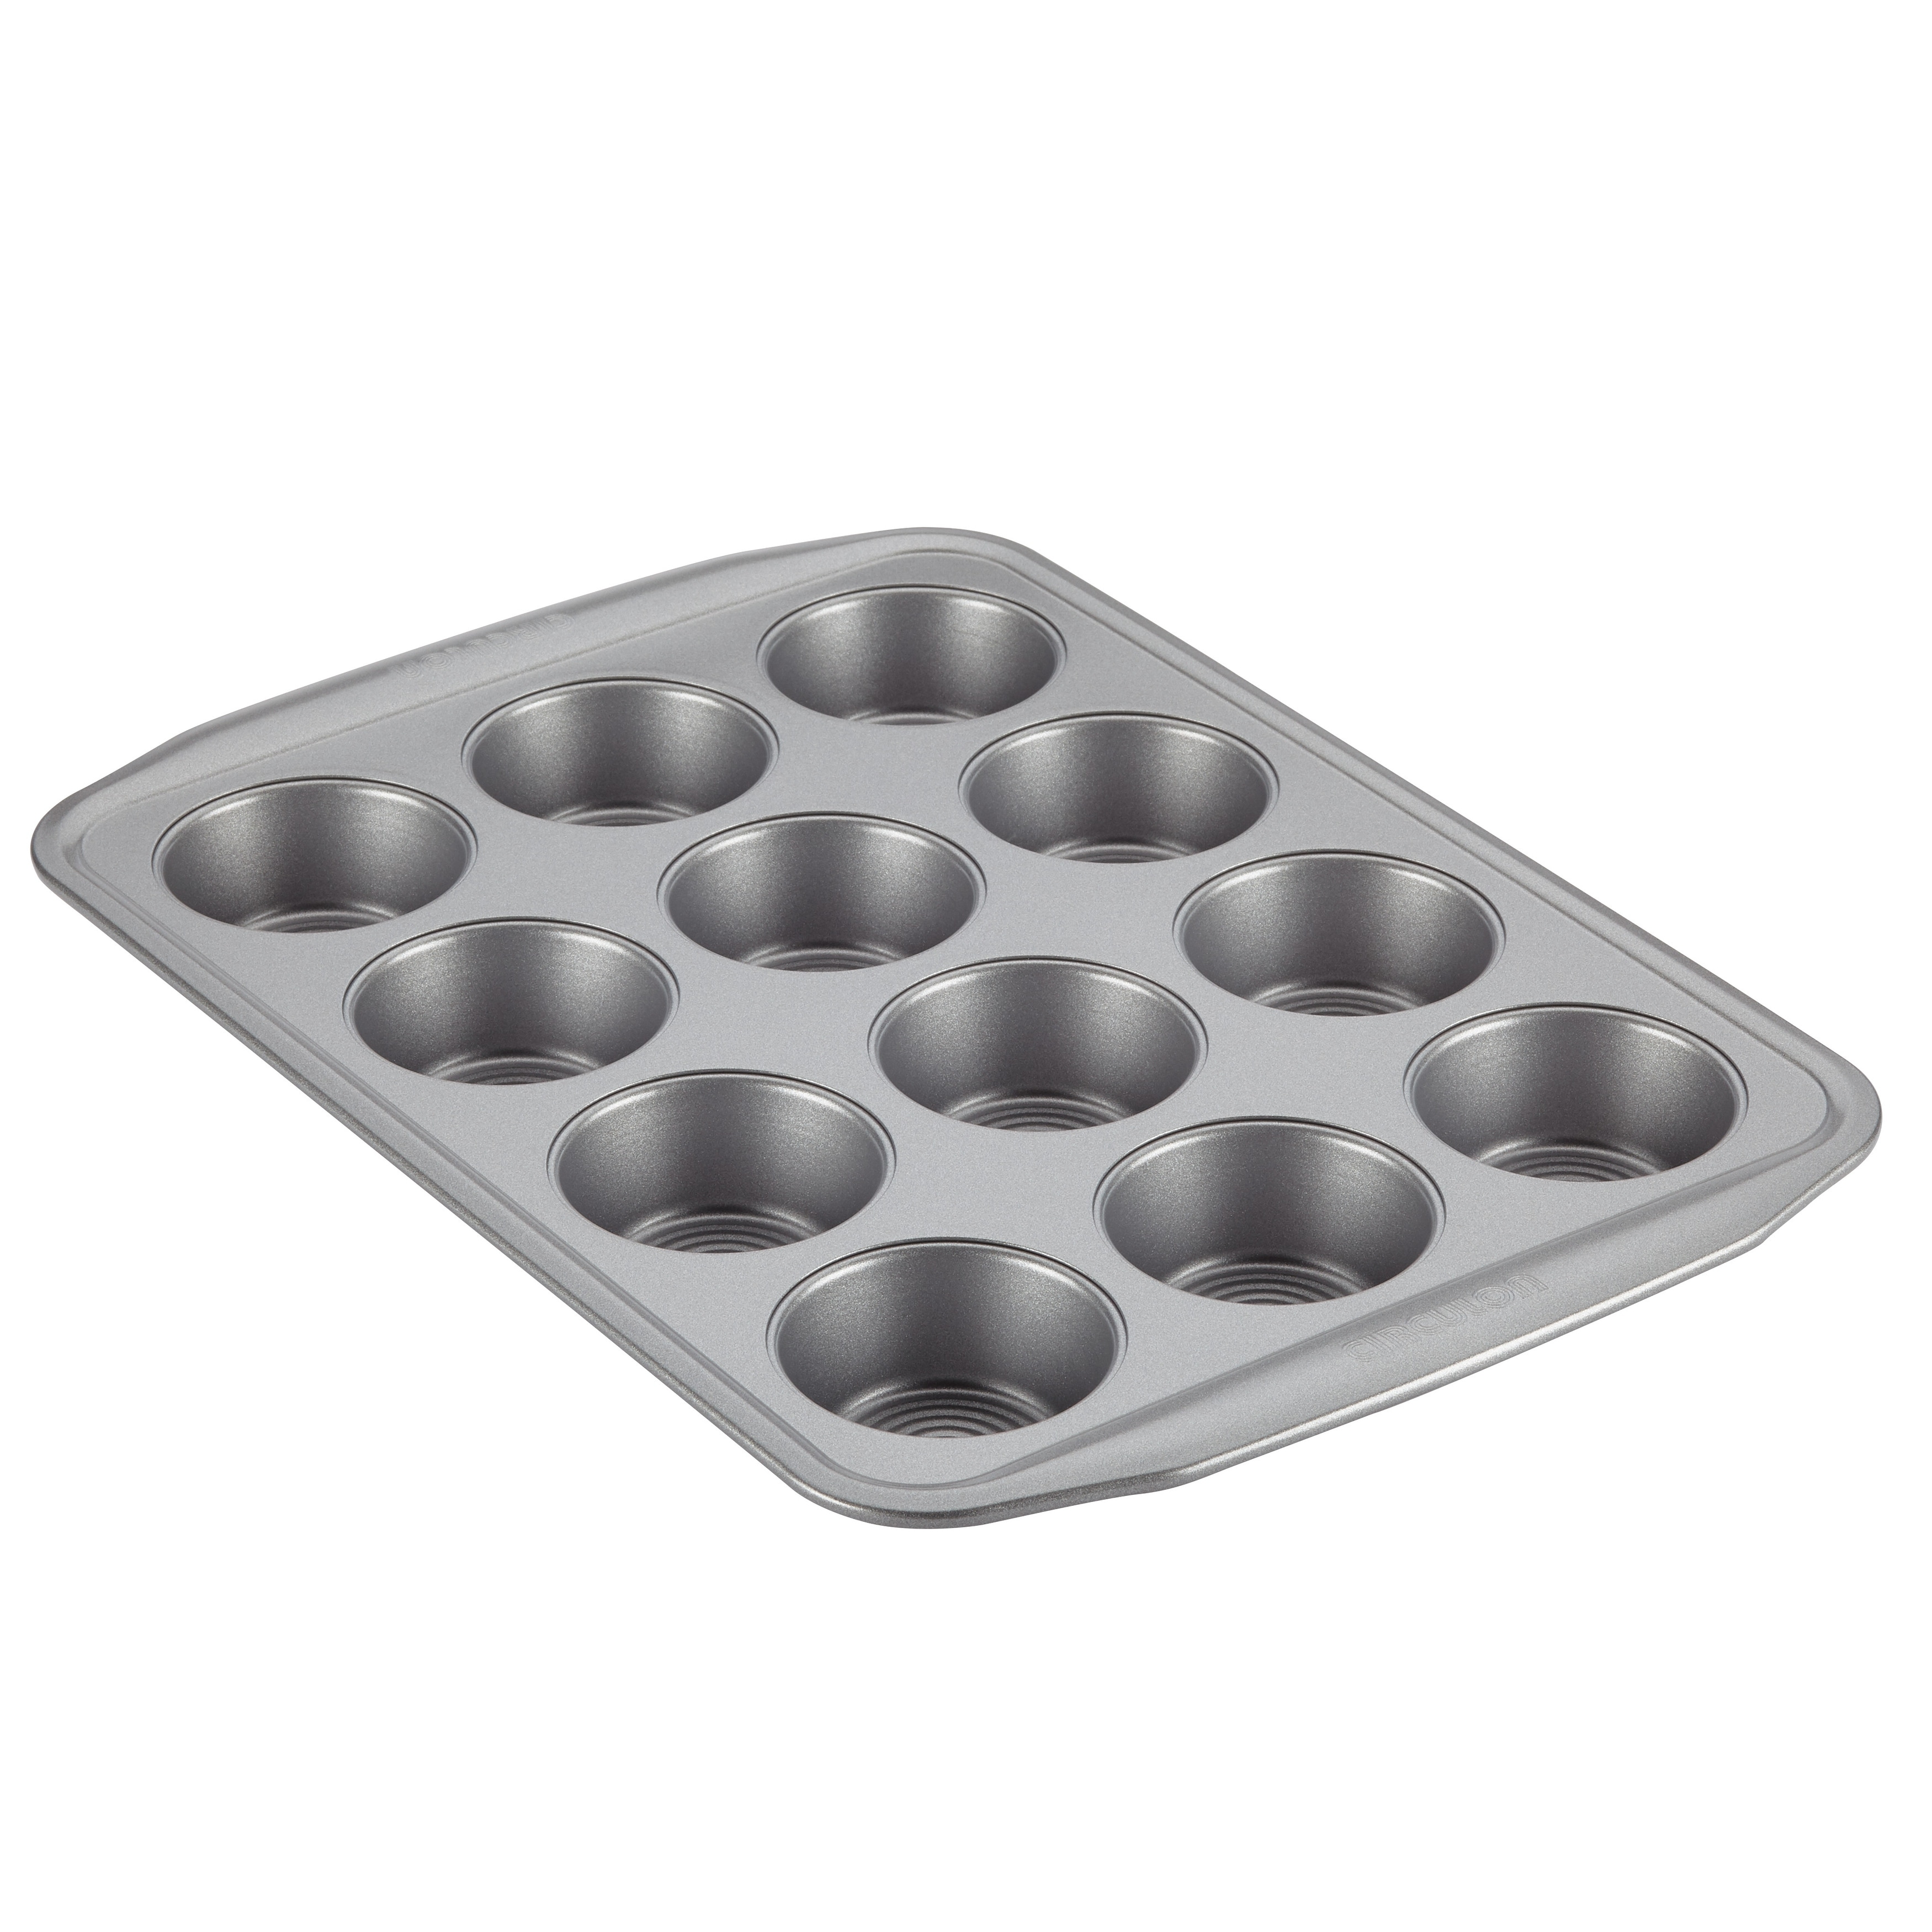  Nordic Ware Natural Aluminum Commercial Muffin Pan, 12 Cup: Cupcake  Pan: Home & Kitchen